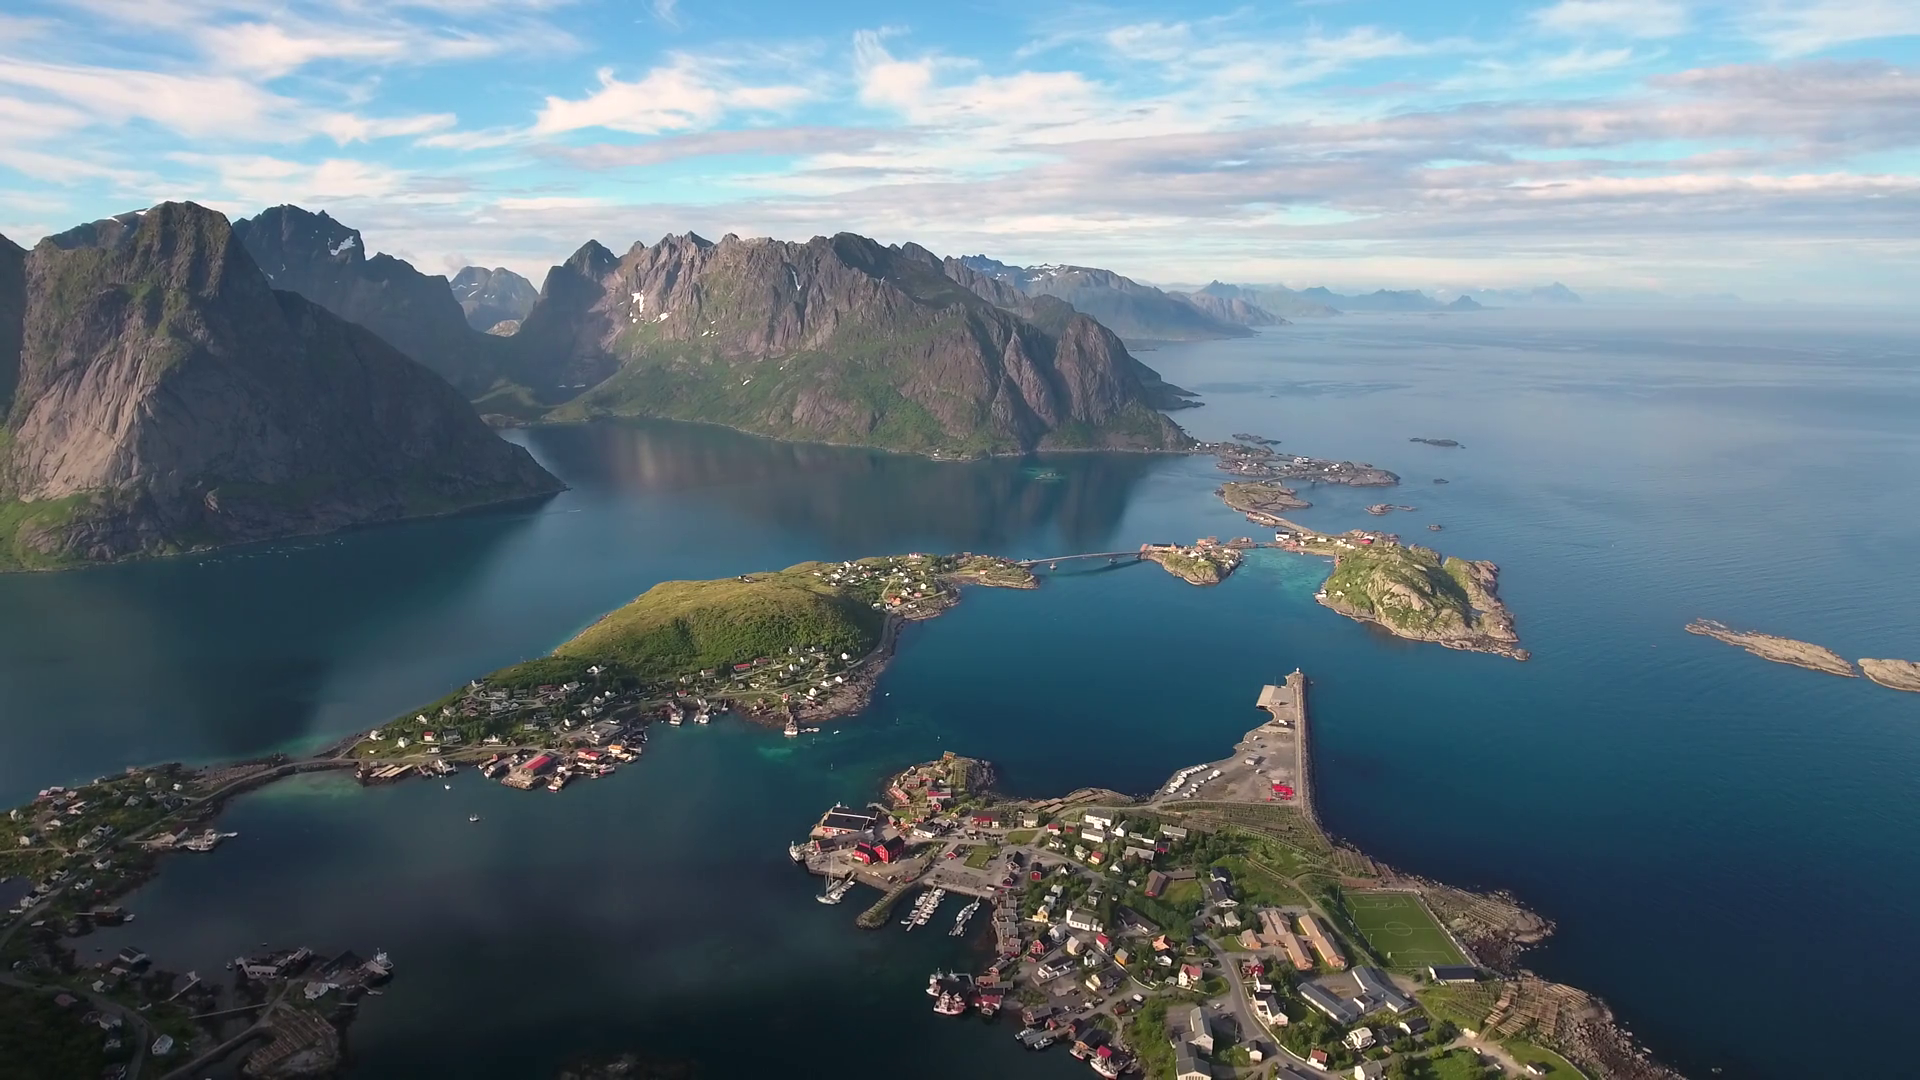 Lofoten islands is an archipelago in the county of Nordland, Norway ...